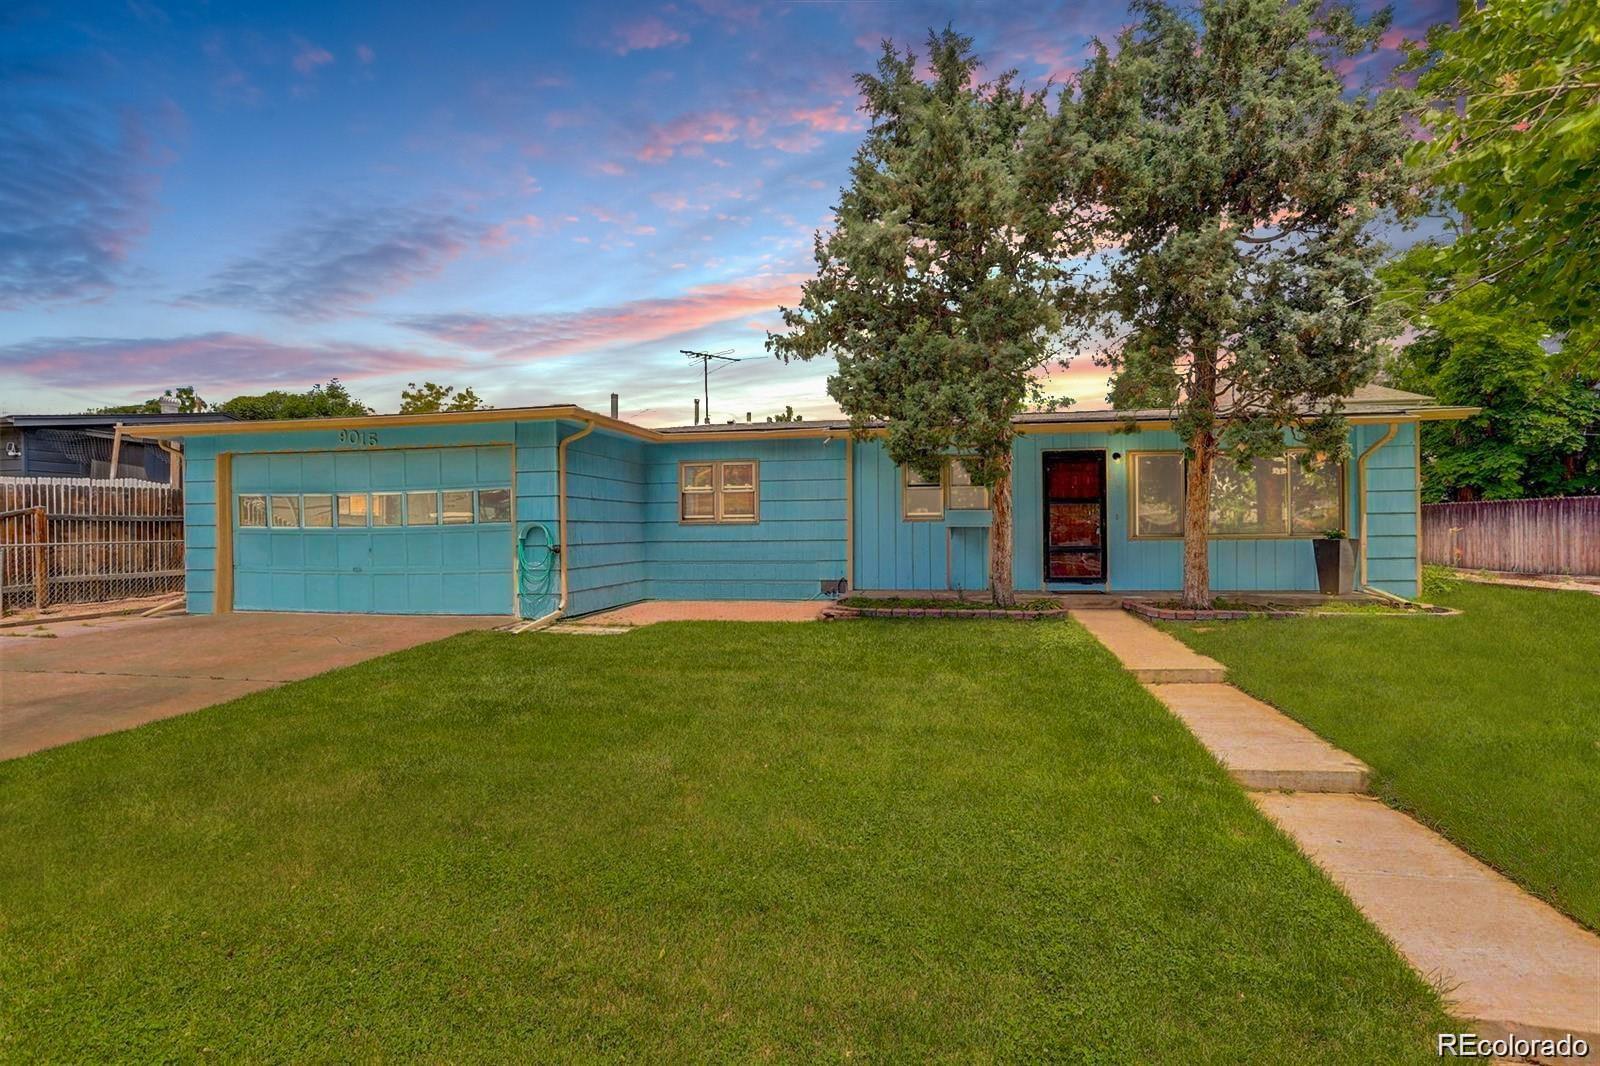 9015 W 49th Place, arvada MLS: 2444364 Beds: 3 Baths: 1 Price: $475,000